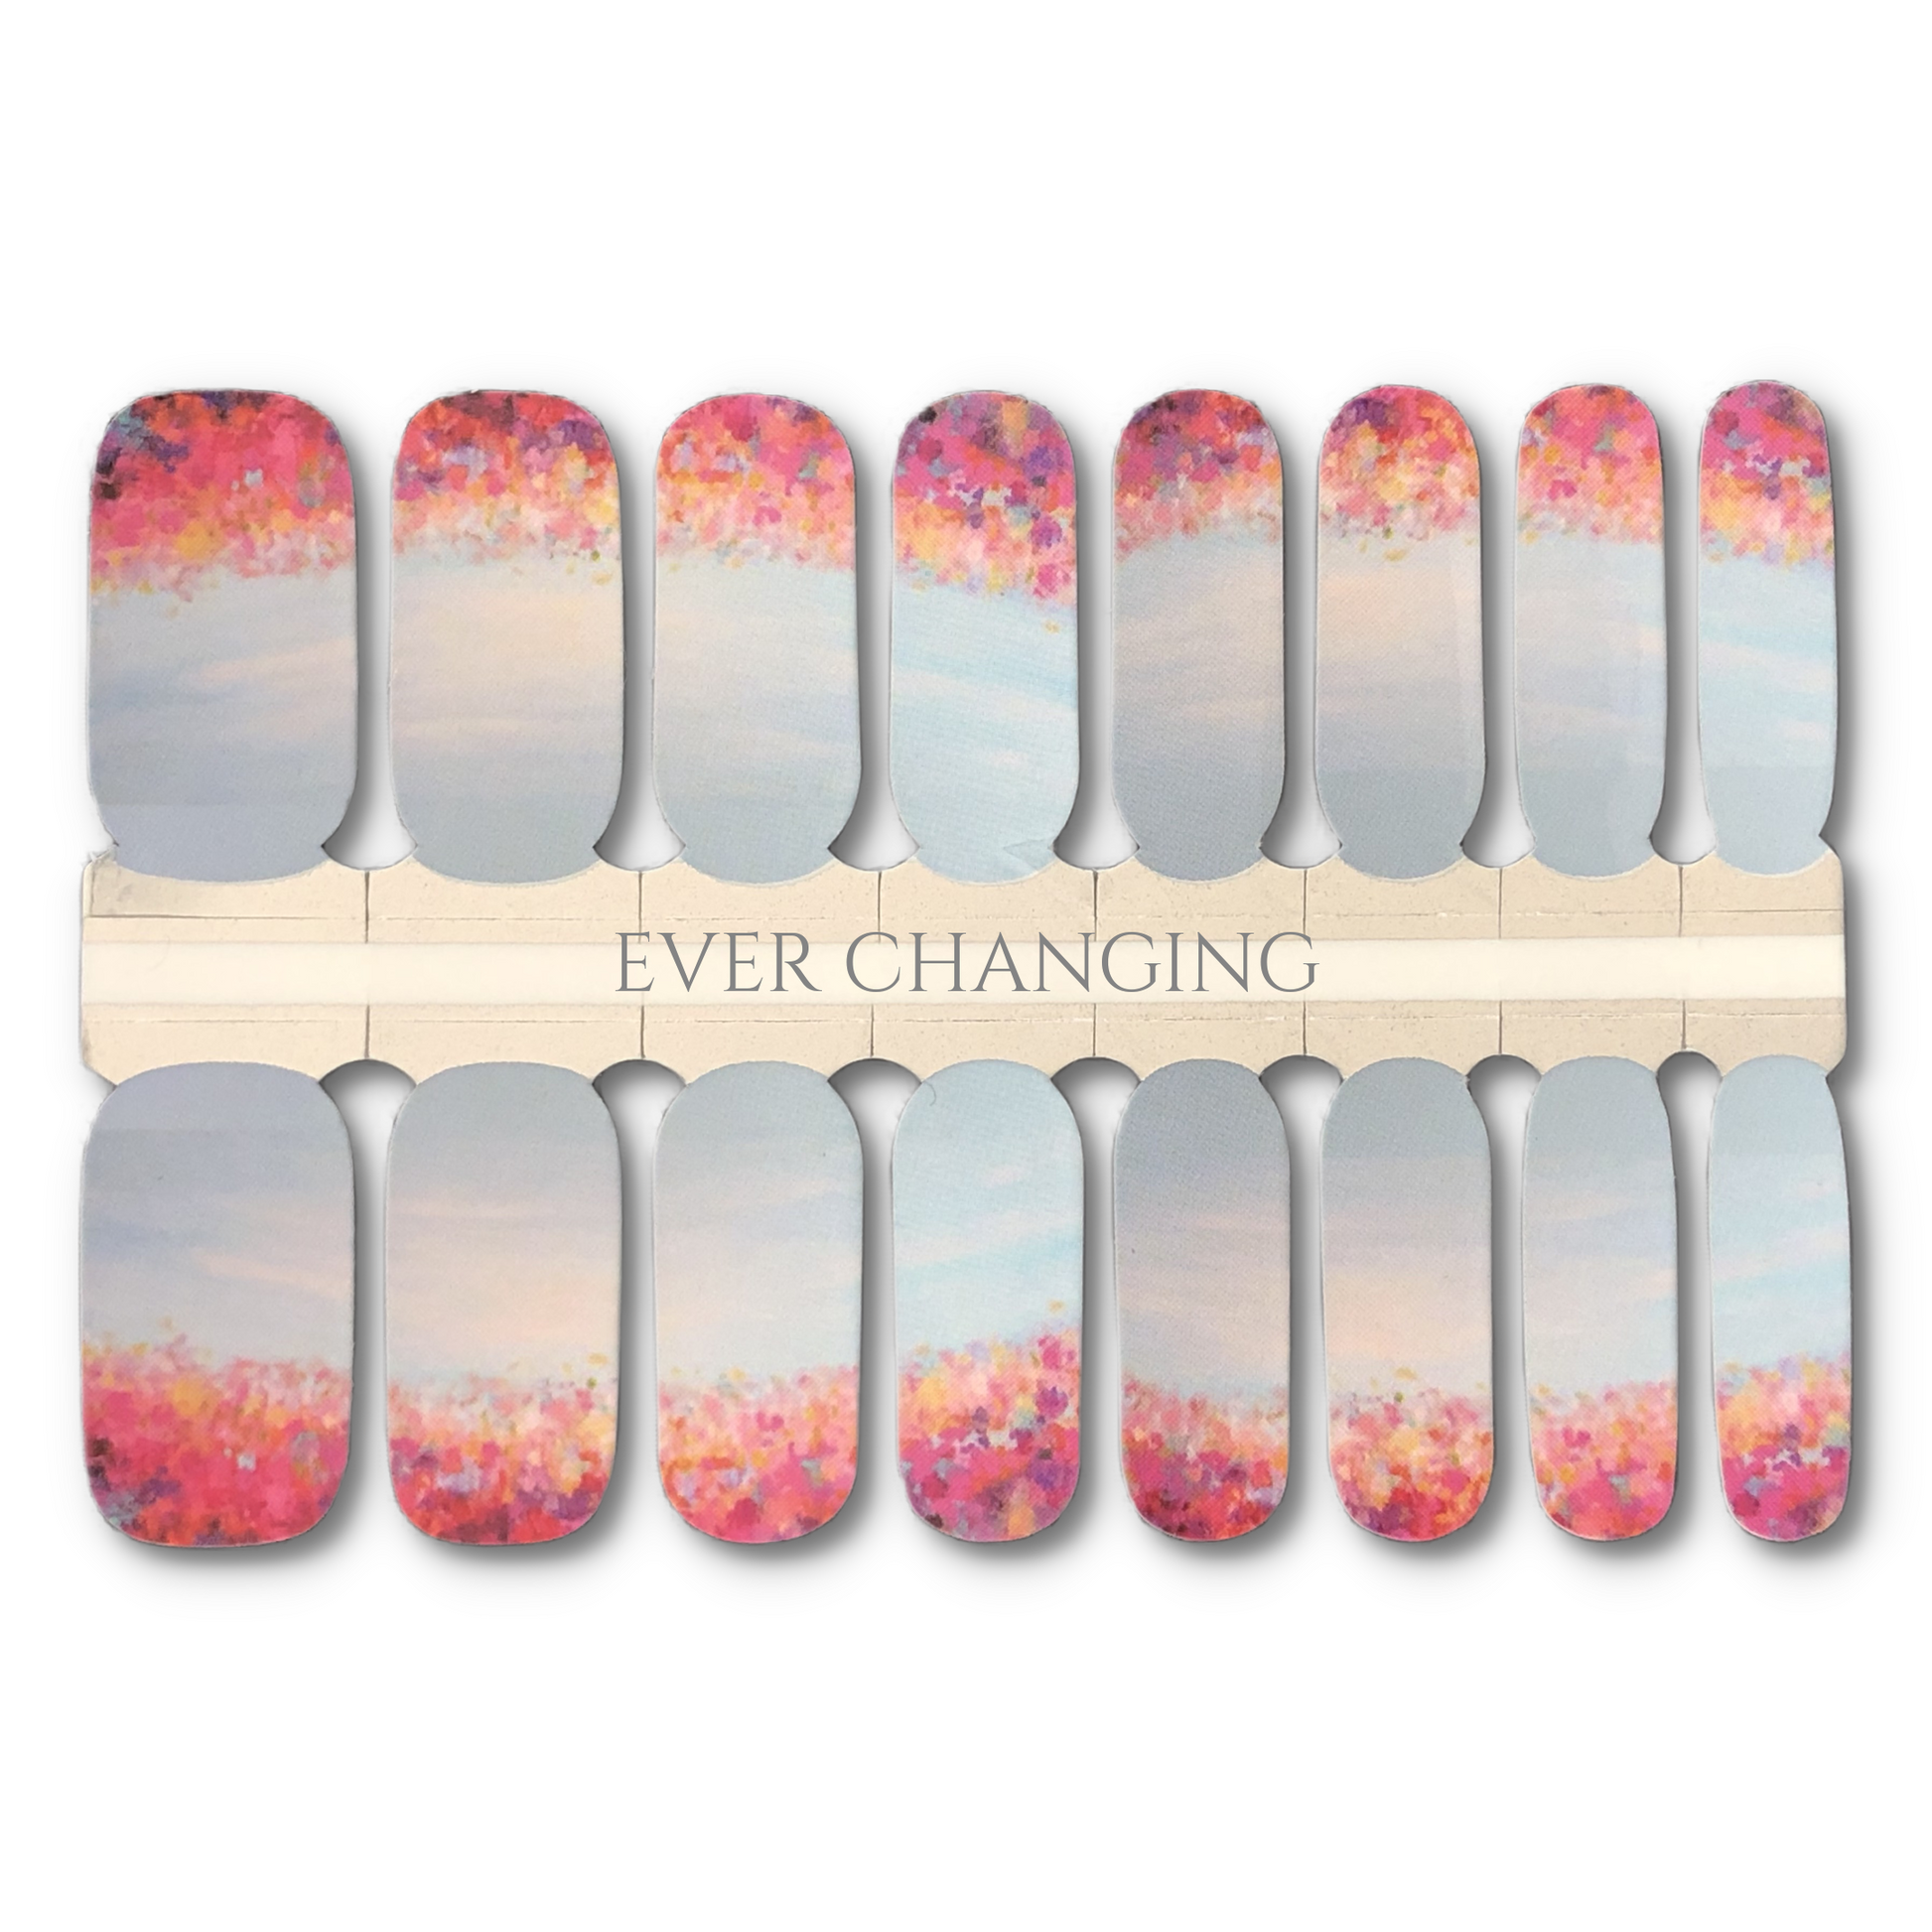 16 Real nail polish strips also called nail wraps or nail stickers. Design reminiscent of an impressionist painting of fall colors under blue skies done in a cream finish.